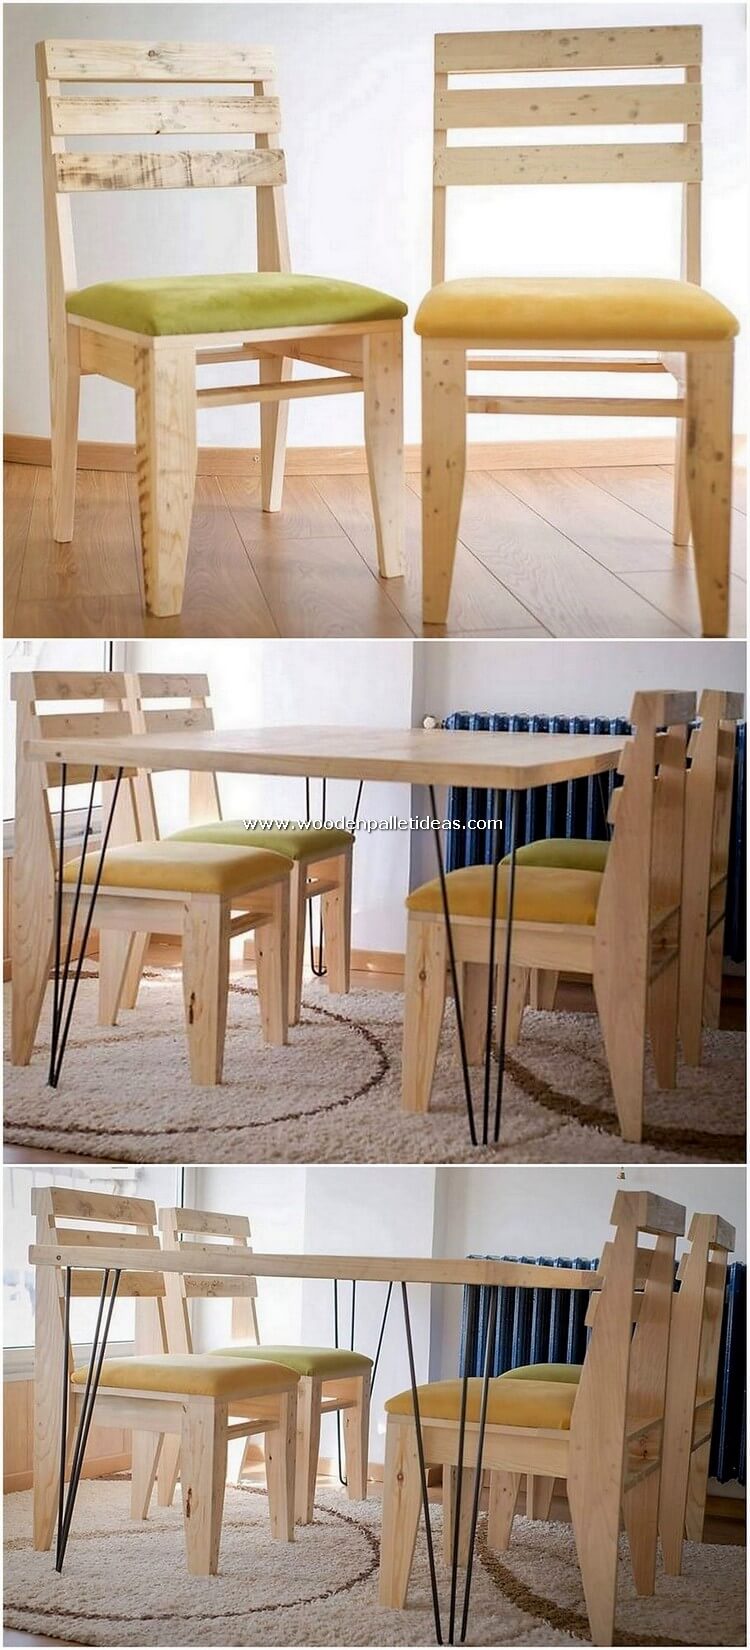 Pallet-Chairs-and-Table-1